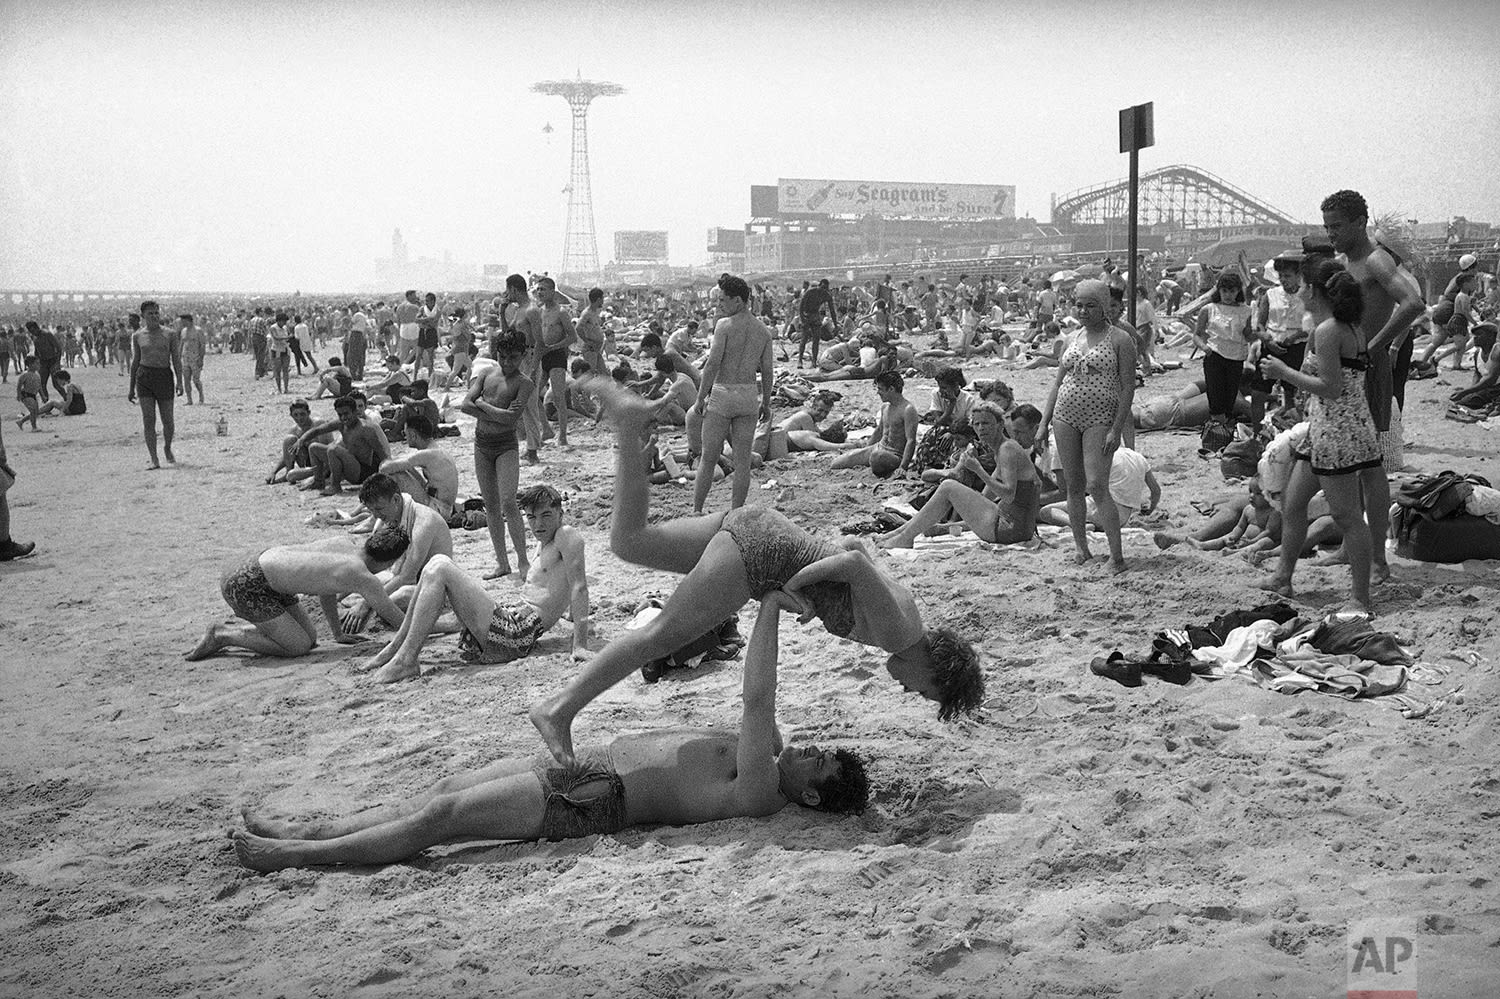 Over a million people sought relief from the 92.6 degree heat at Coney Island in the Brooklyn borough of New York on June 16, 1957. | Photo John Lindsay